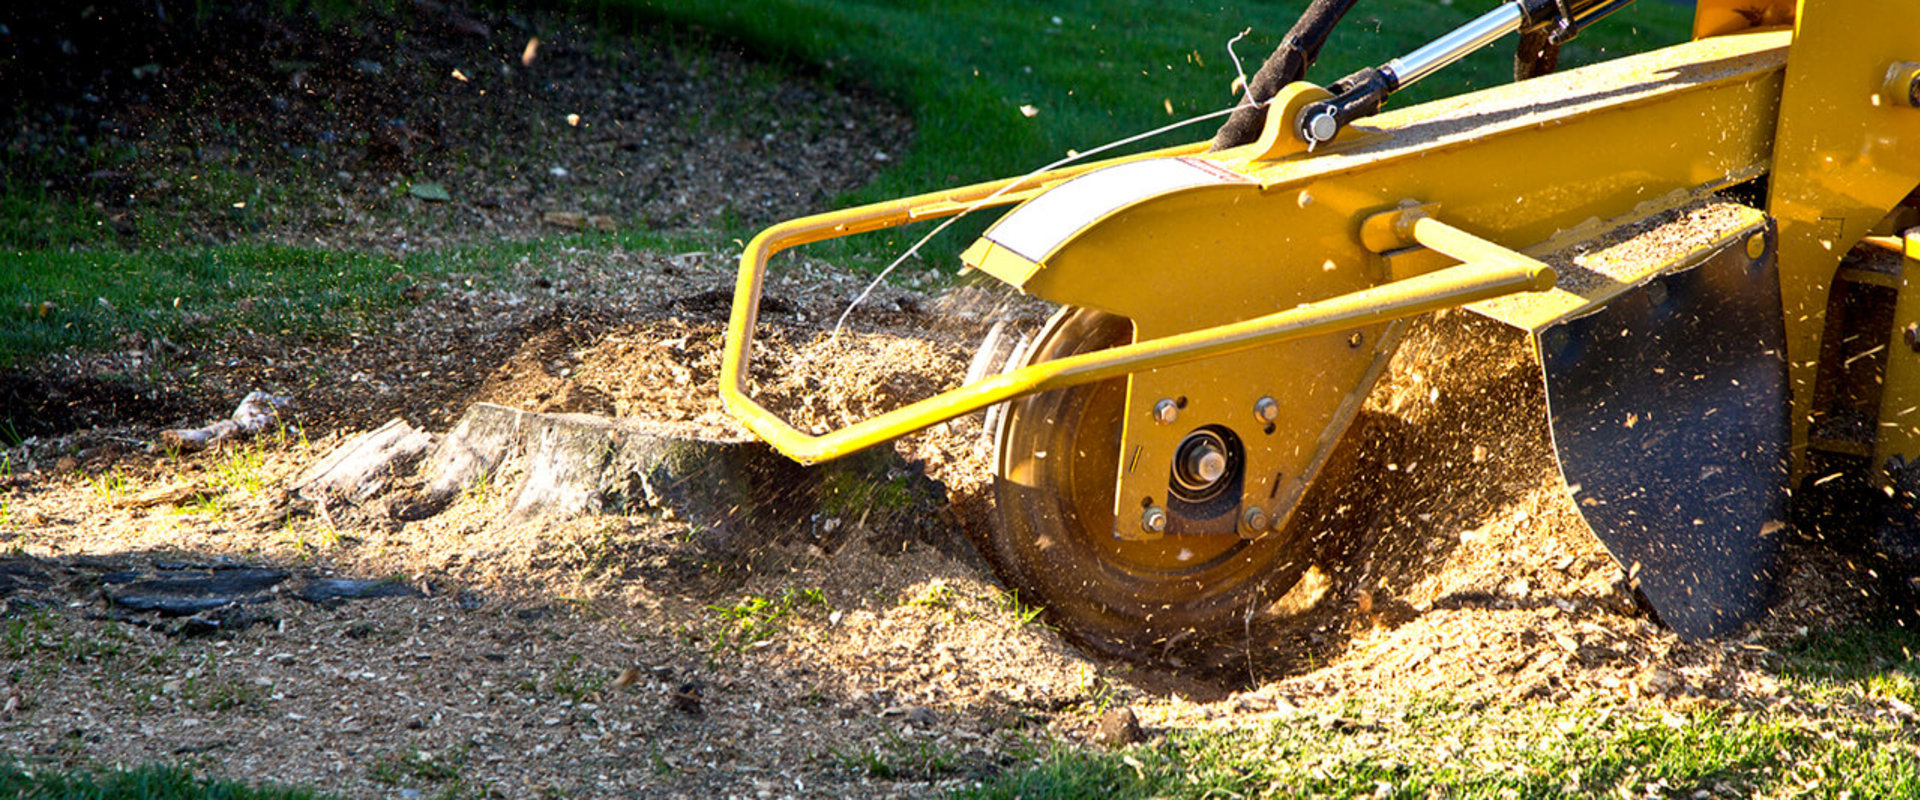 How to Find the Best Stump Grinding Services Near You